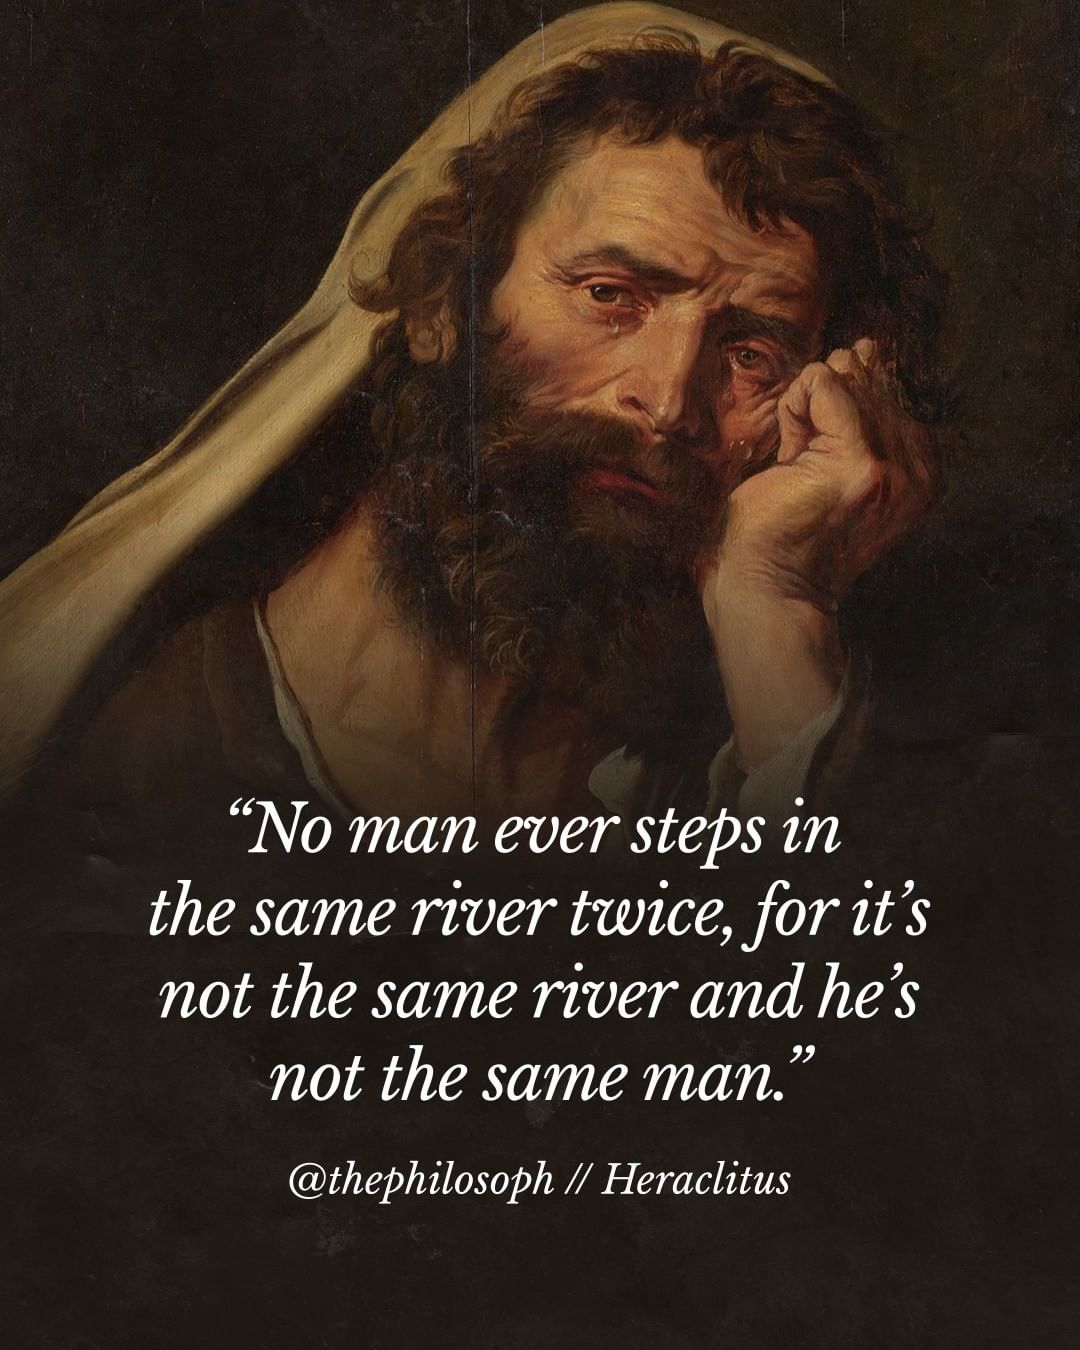 No man ever steps in the same river twice. For it’s not the same river and he’s not the same man.